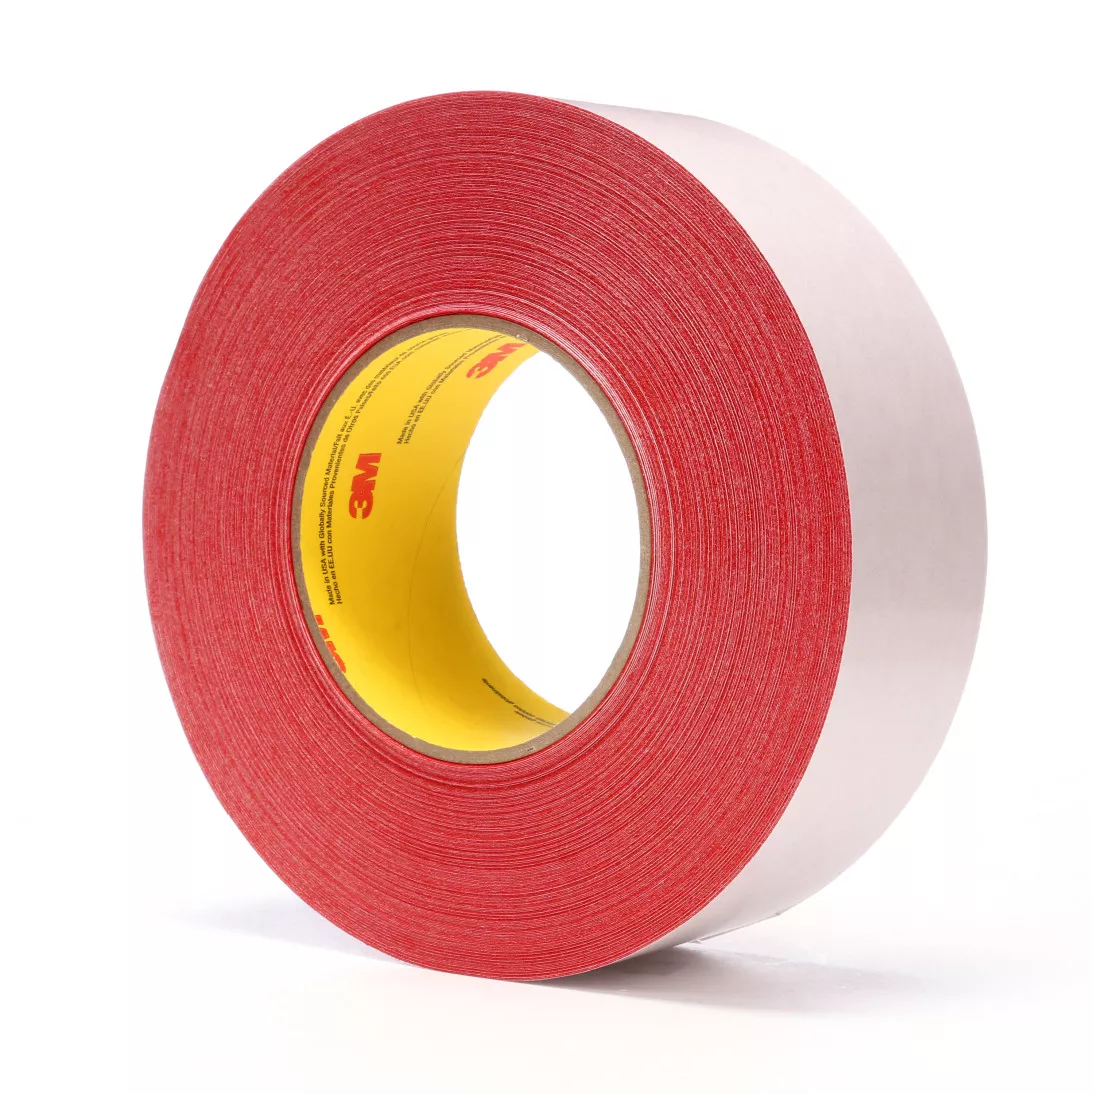 3M™ Double Coated Tape 9741R, Red, 48 mm x 55 m, 6.5 mil, 24 rolls per
case